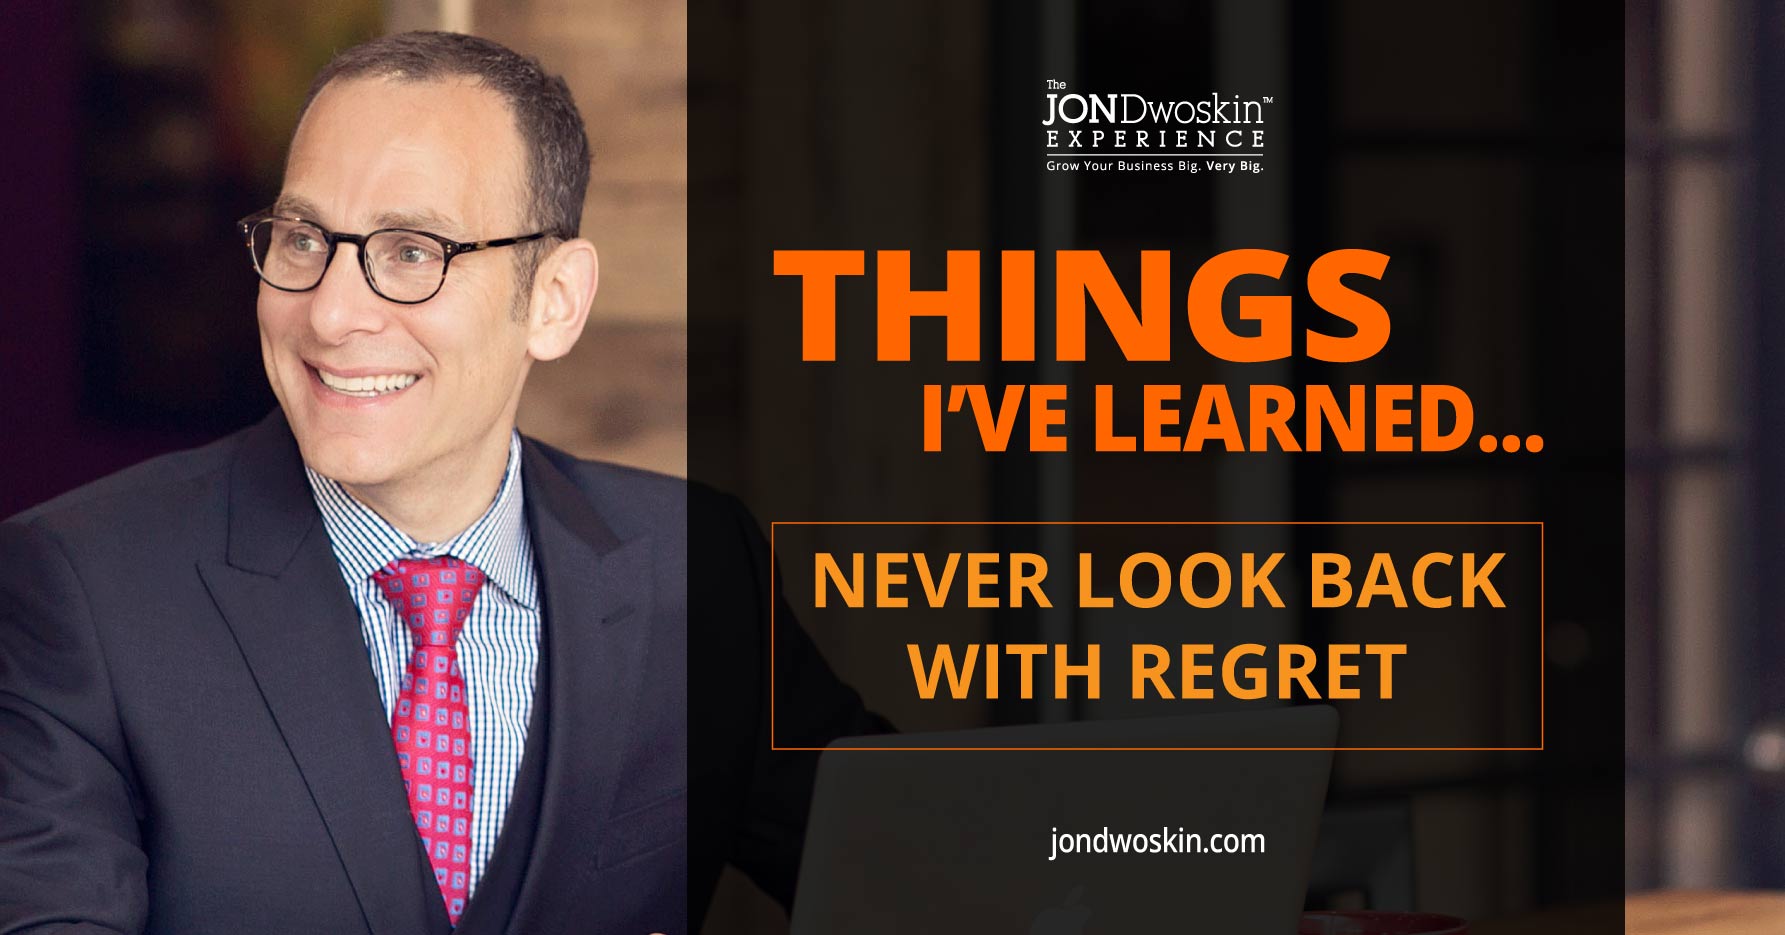 5 Things I’ve Learned in My 50 Years: Never Look Back with Regret